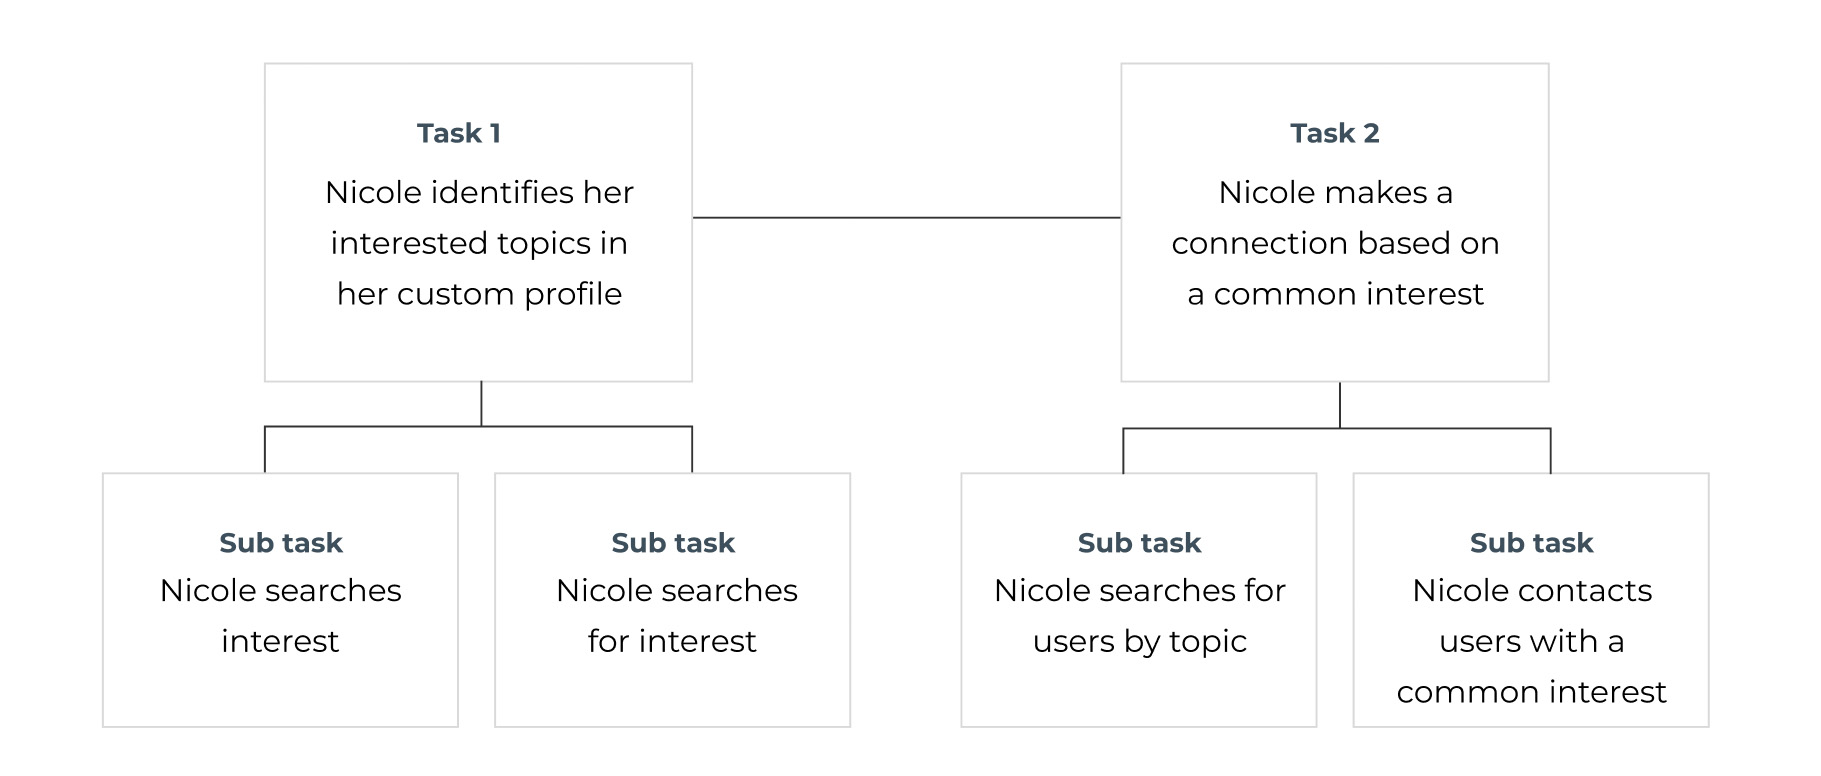 Task 1: Nicole identifies her interested topics in her custom profile. Subtasks: Nicole searches for interest, and Nicole saves interest. Task 2: Nicole makes a connection based on a common interest. Subtasks: Nicole searches for users by topic, and Nicole contacts users with a common interest.